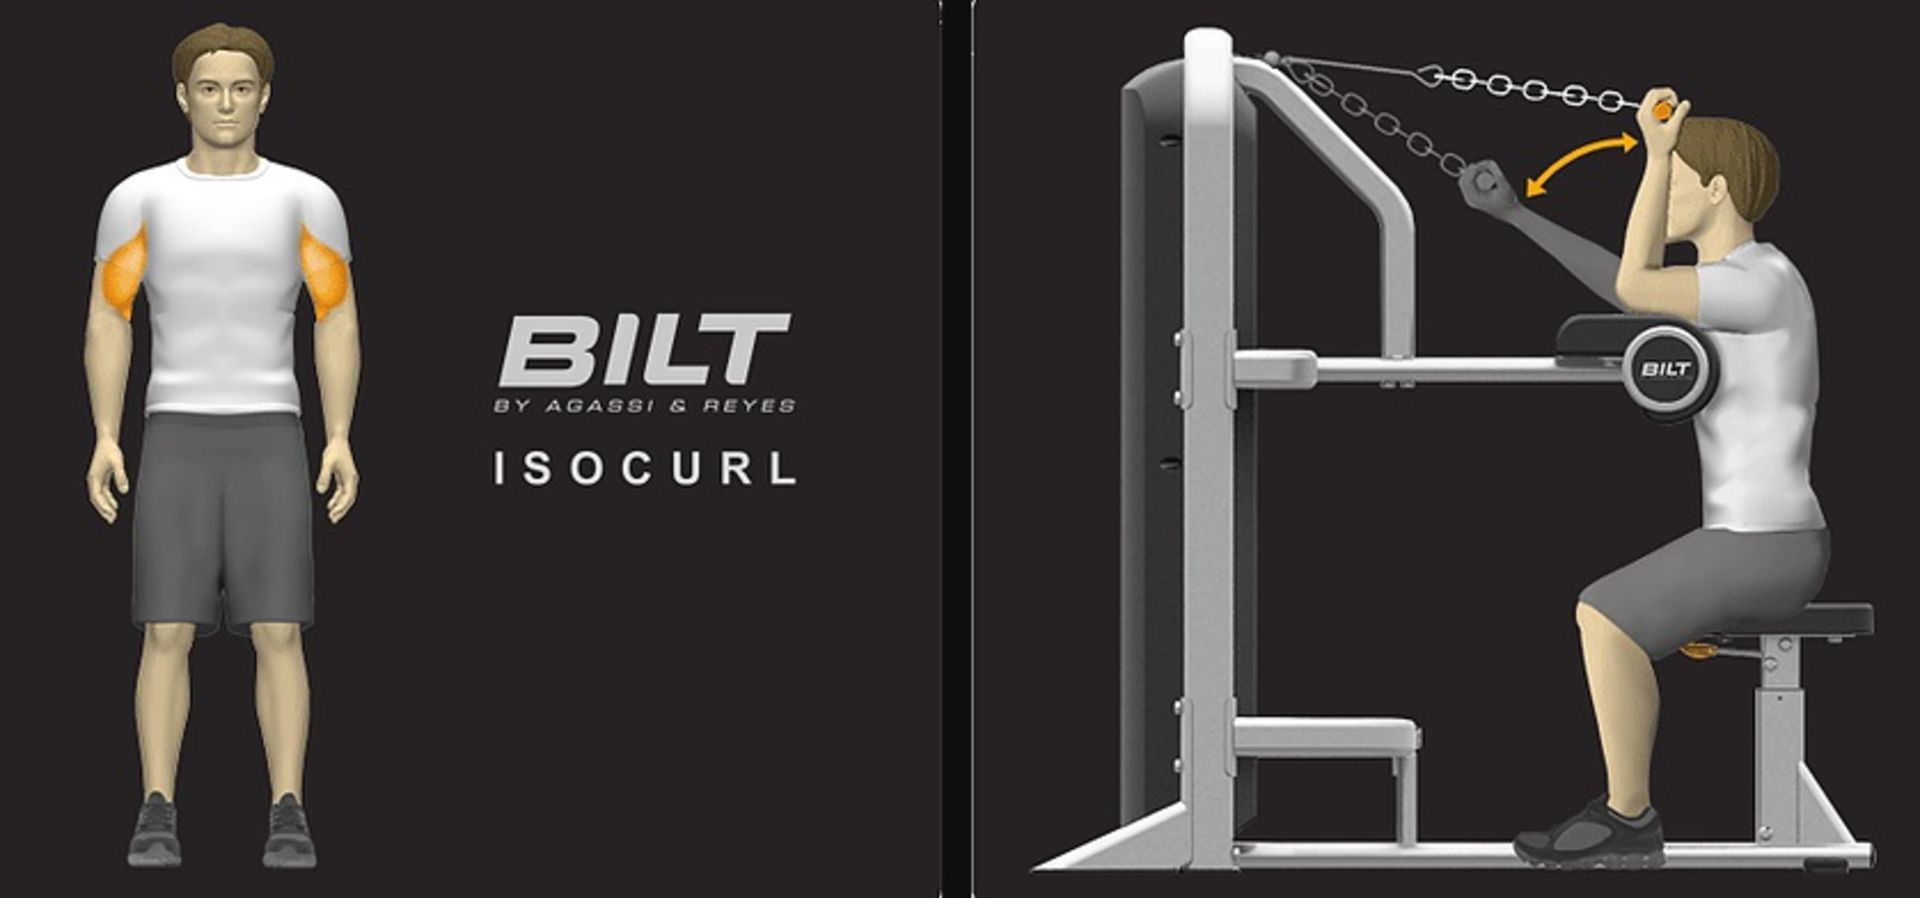 1 x BILT 'ISOCURL' Commercial Gym Machine By Agassi & Reyes - BCIC01 - New / Boxed Stock - Image 2 of 5